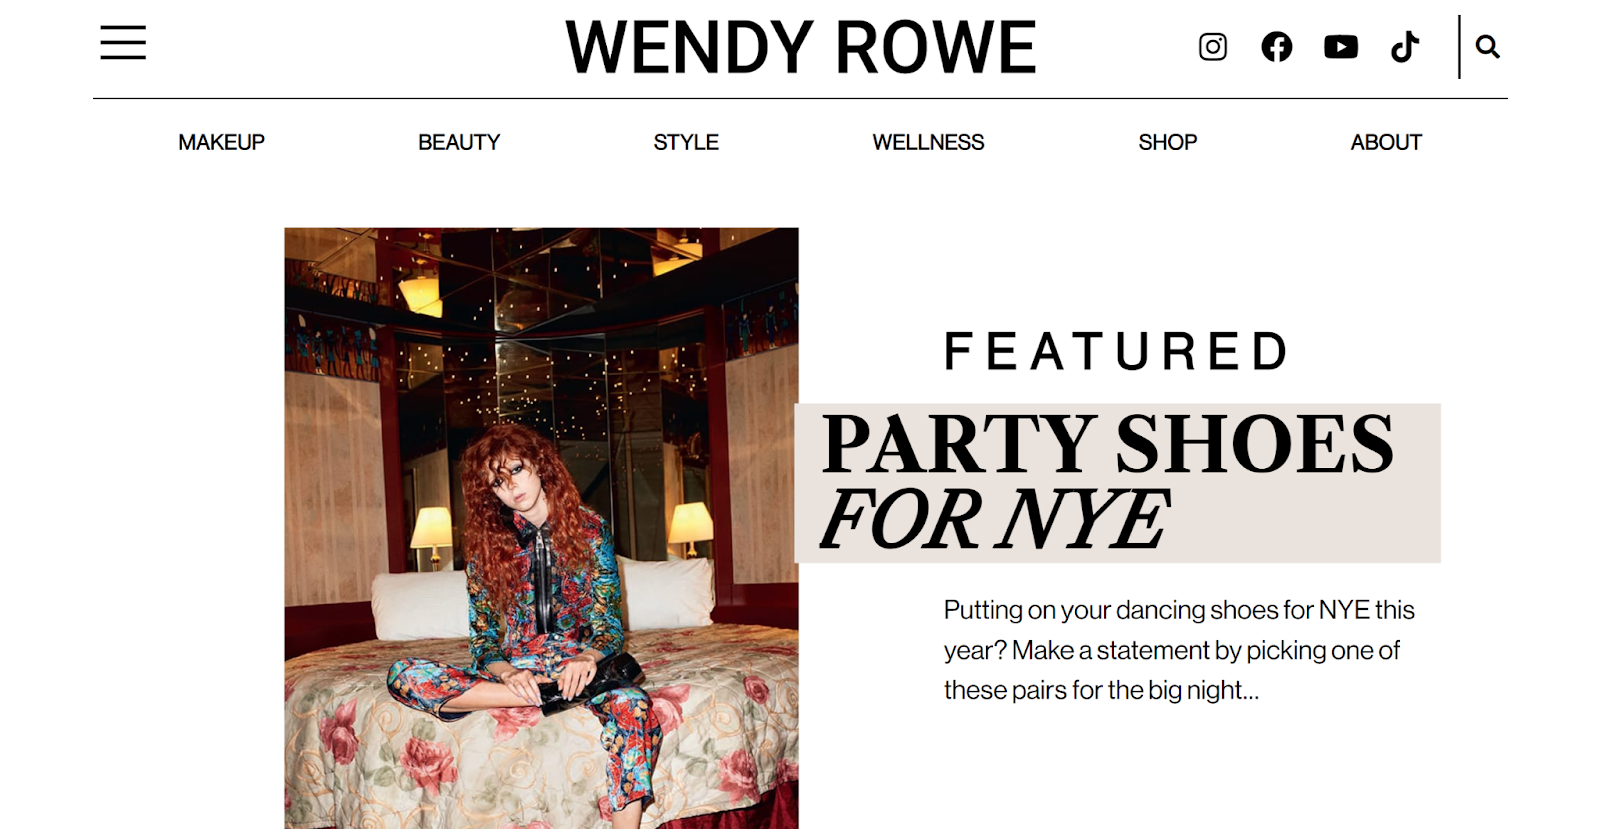 Wendy Rowe's blog covers latest beauty trends along with fashion secrets. 